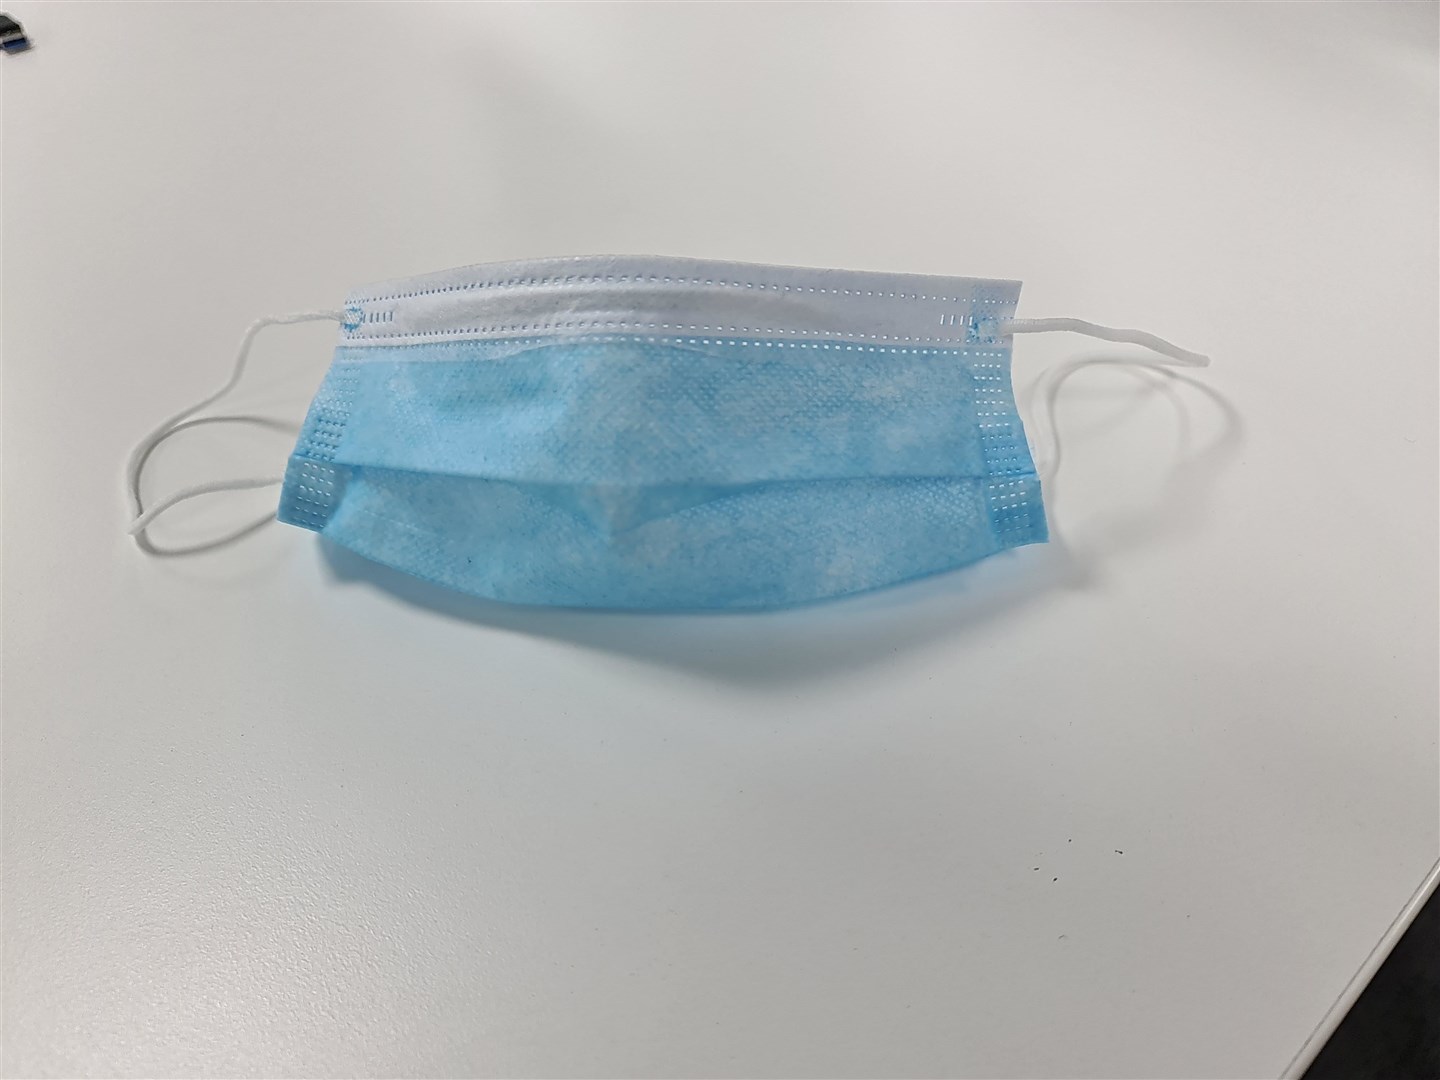 The type of face mask referred to in the guidelines.